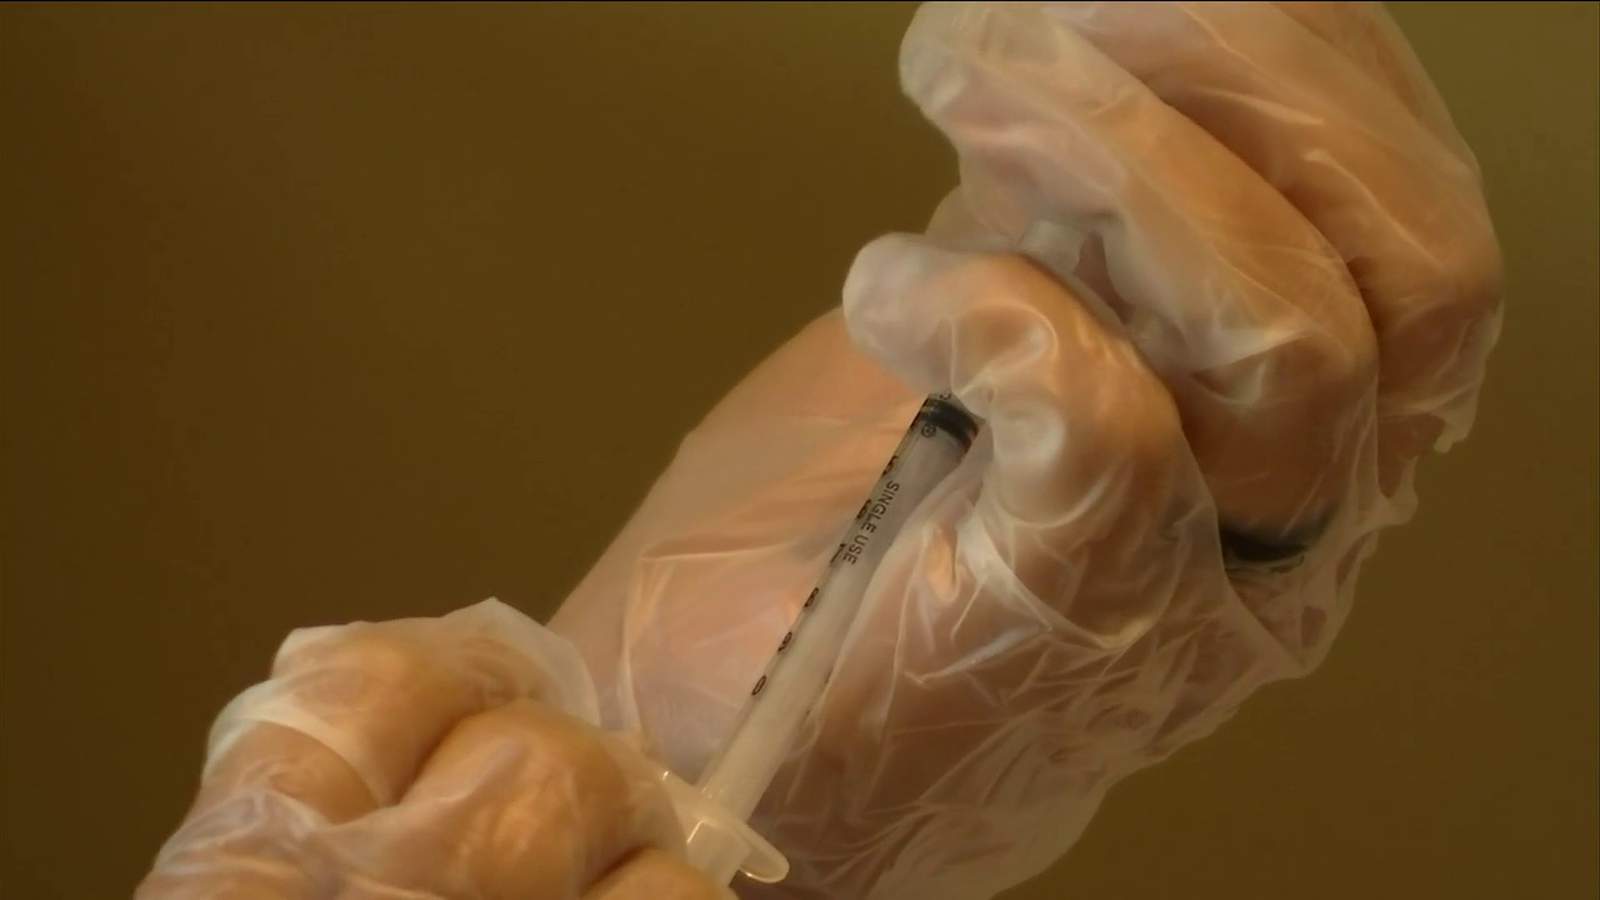 COVID-19 vaccinations first come, first served Monday beginning at two senior centers in Jacksonville